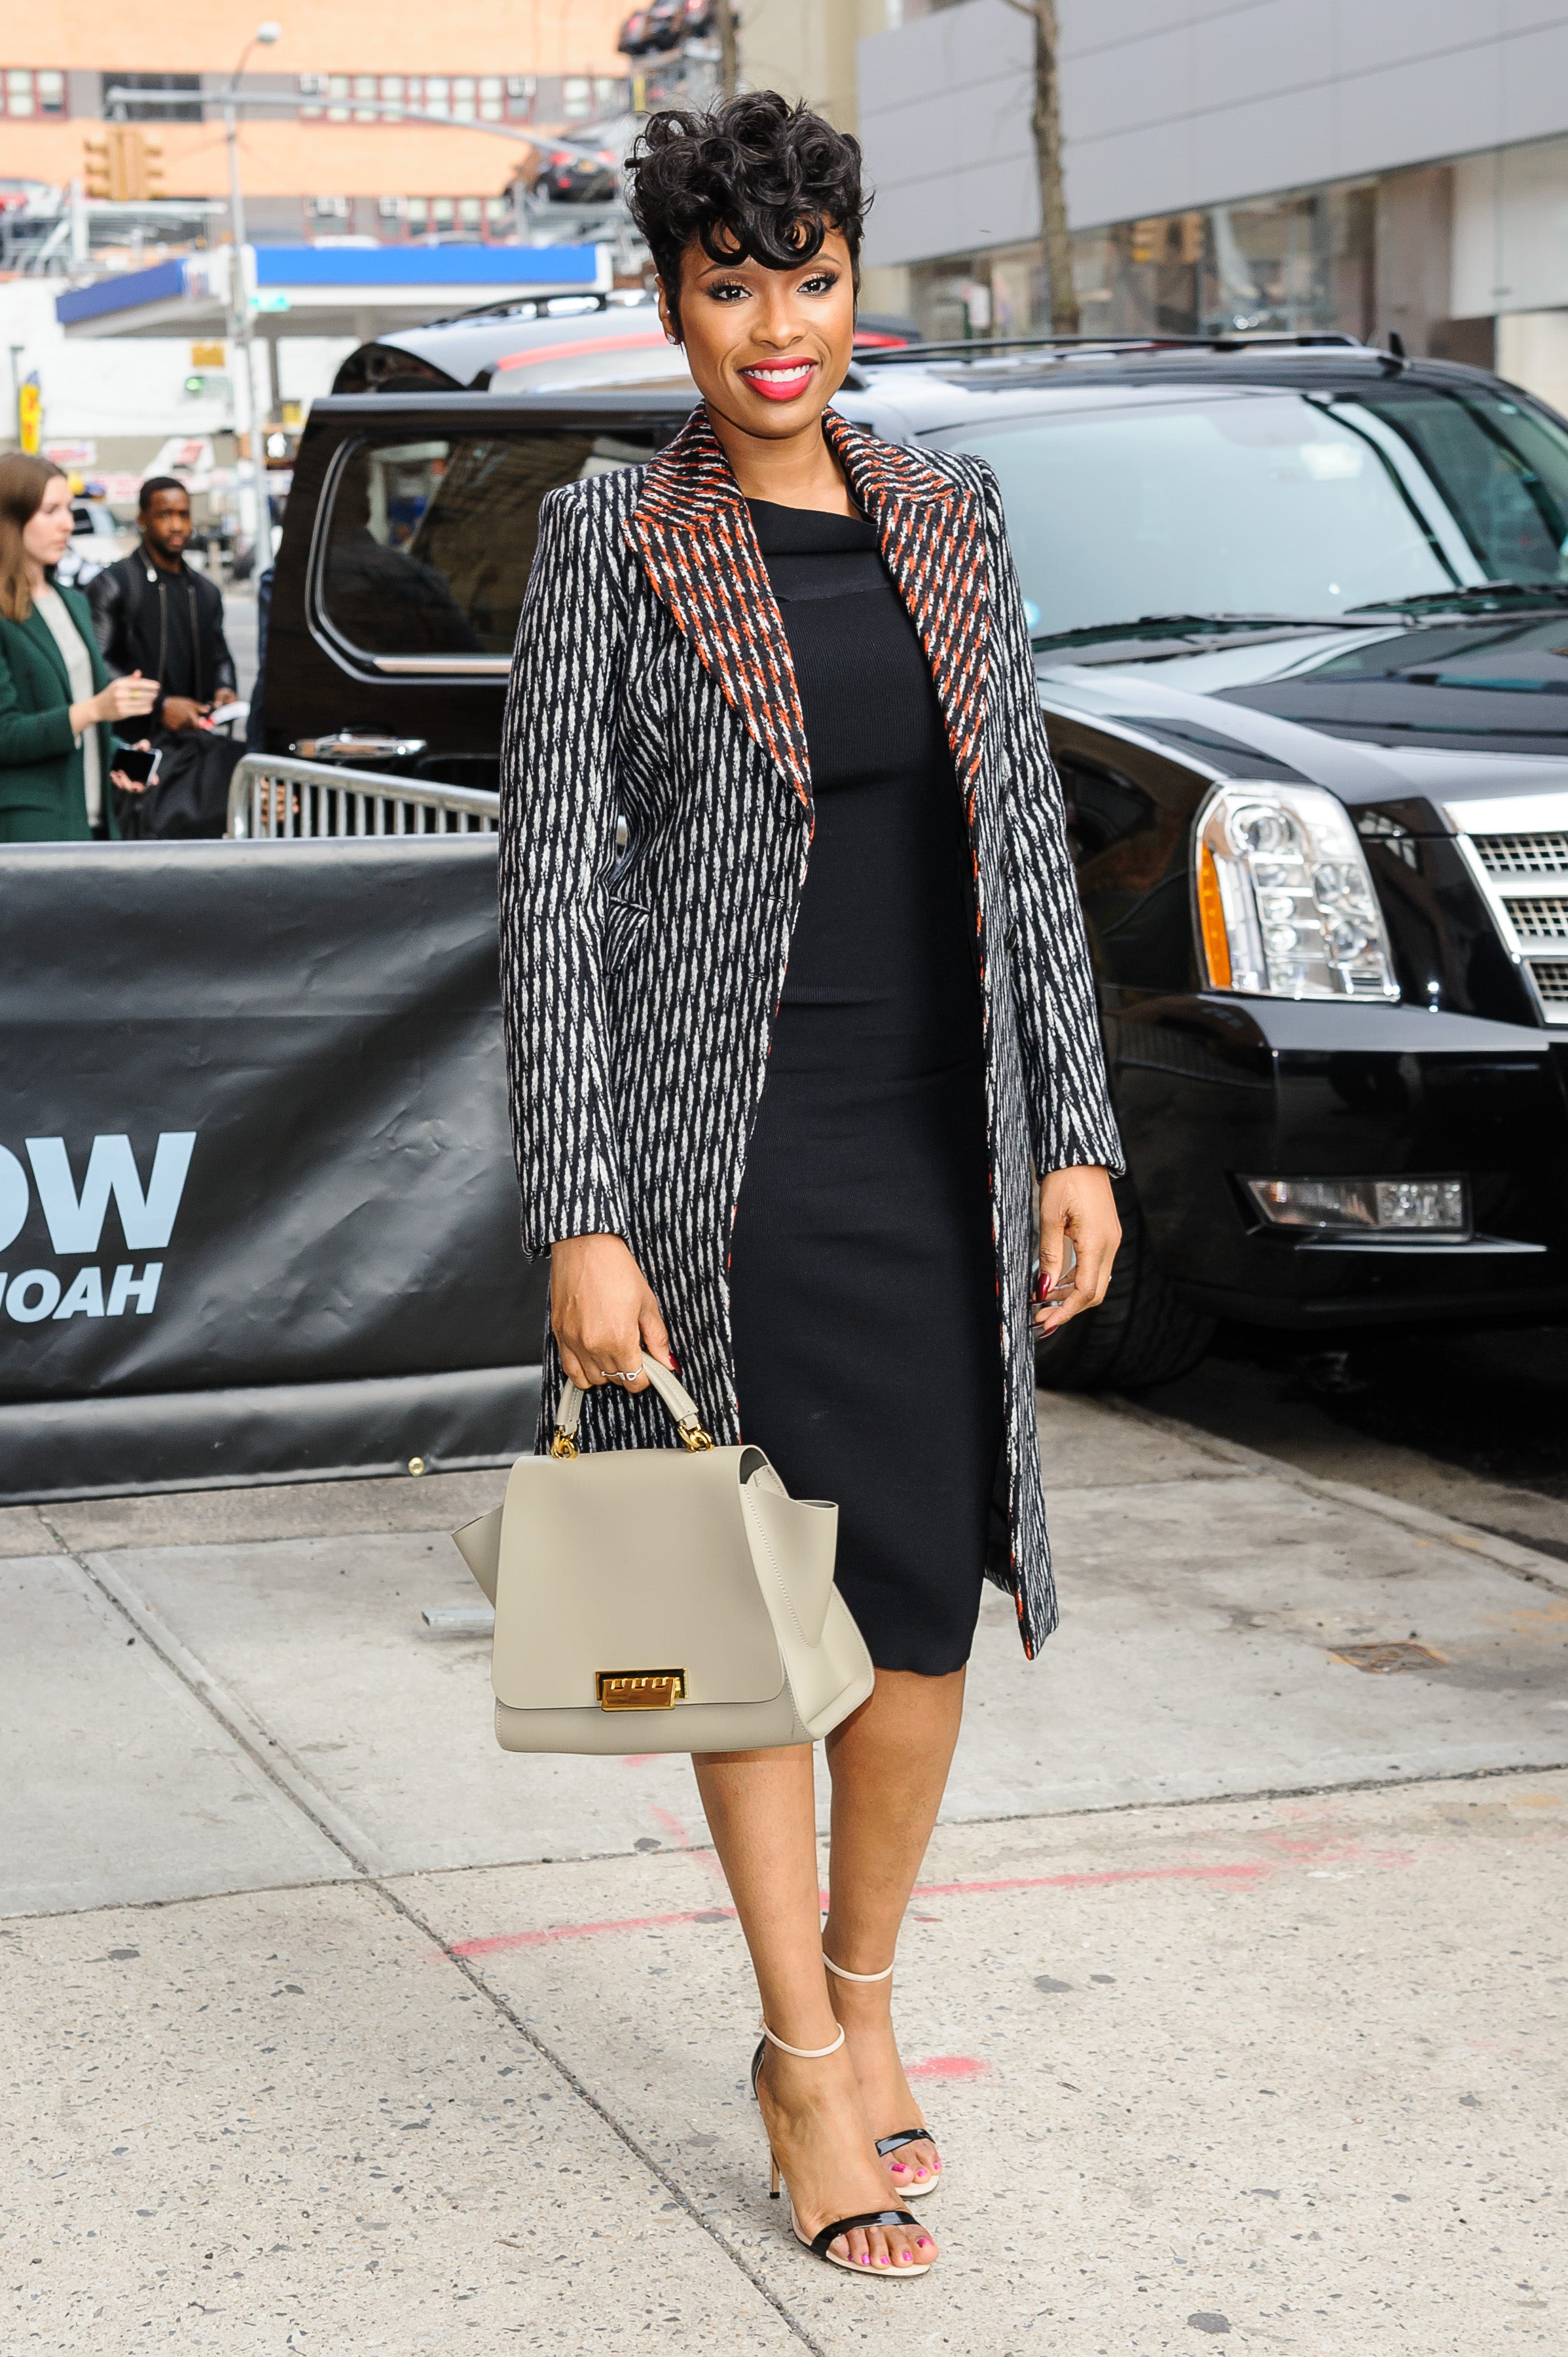 We Can't Stop Swooning Over the Best Style Moments of the Week